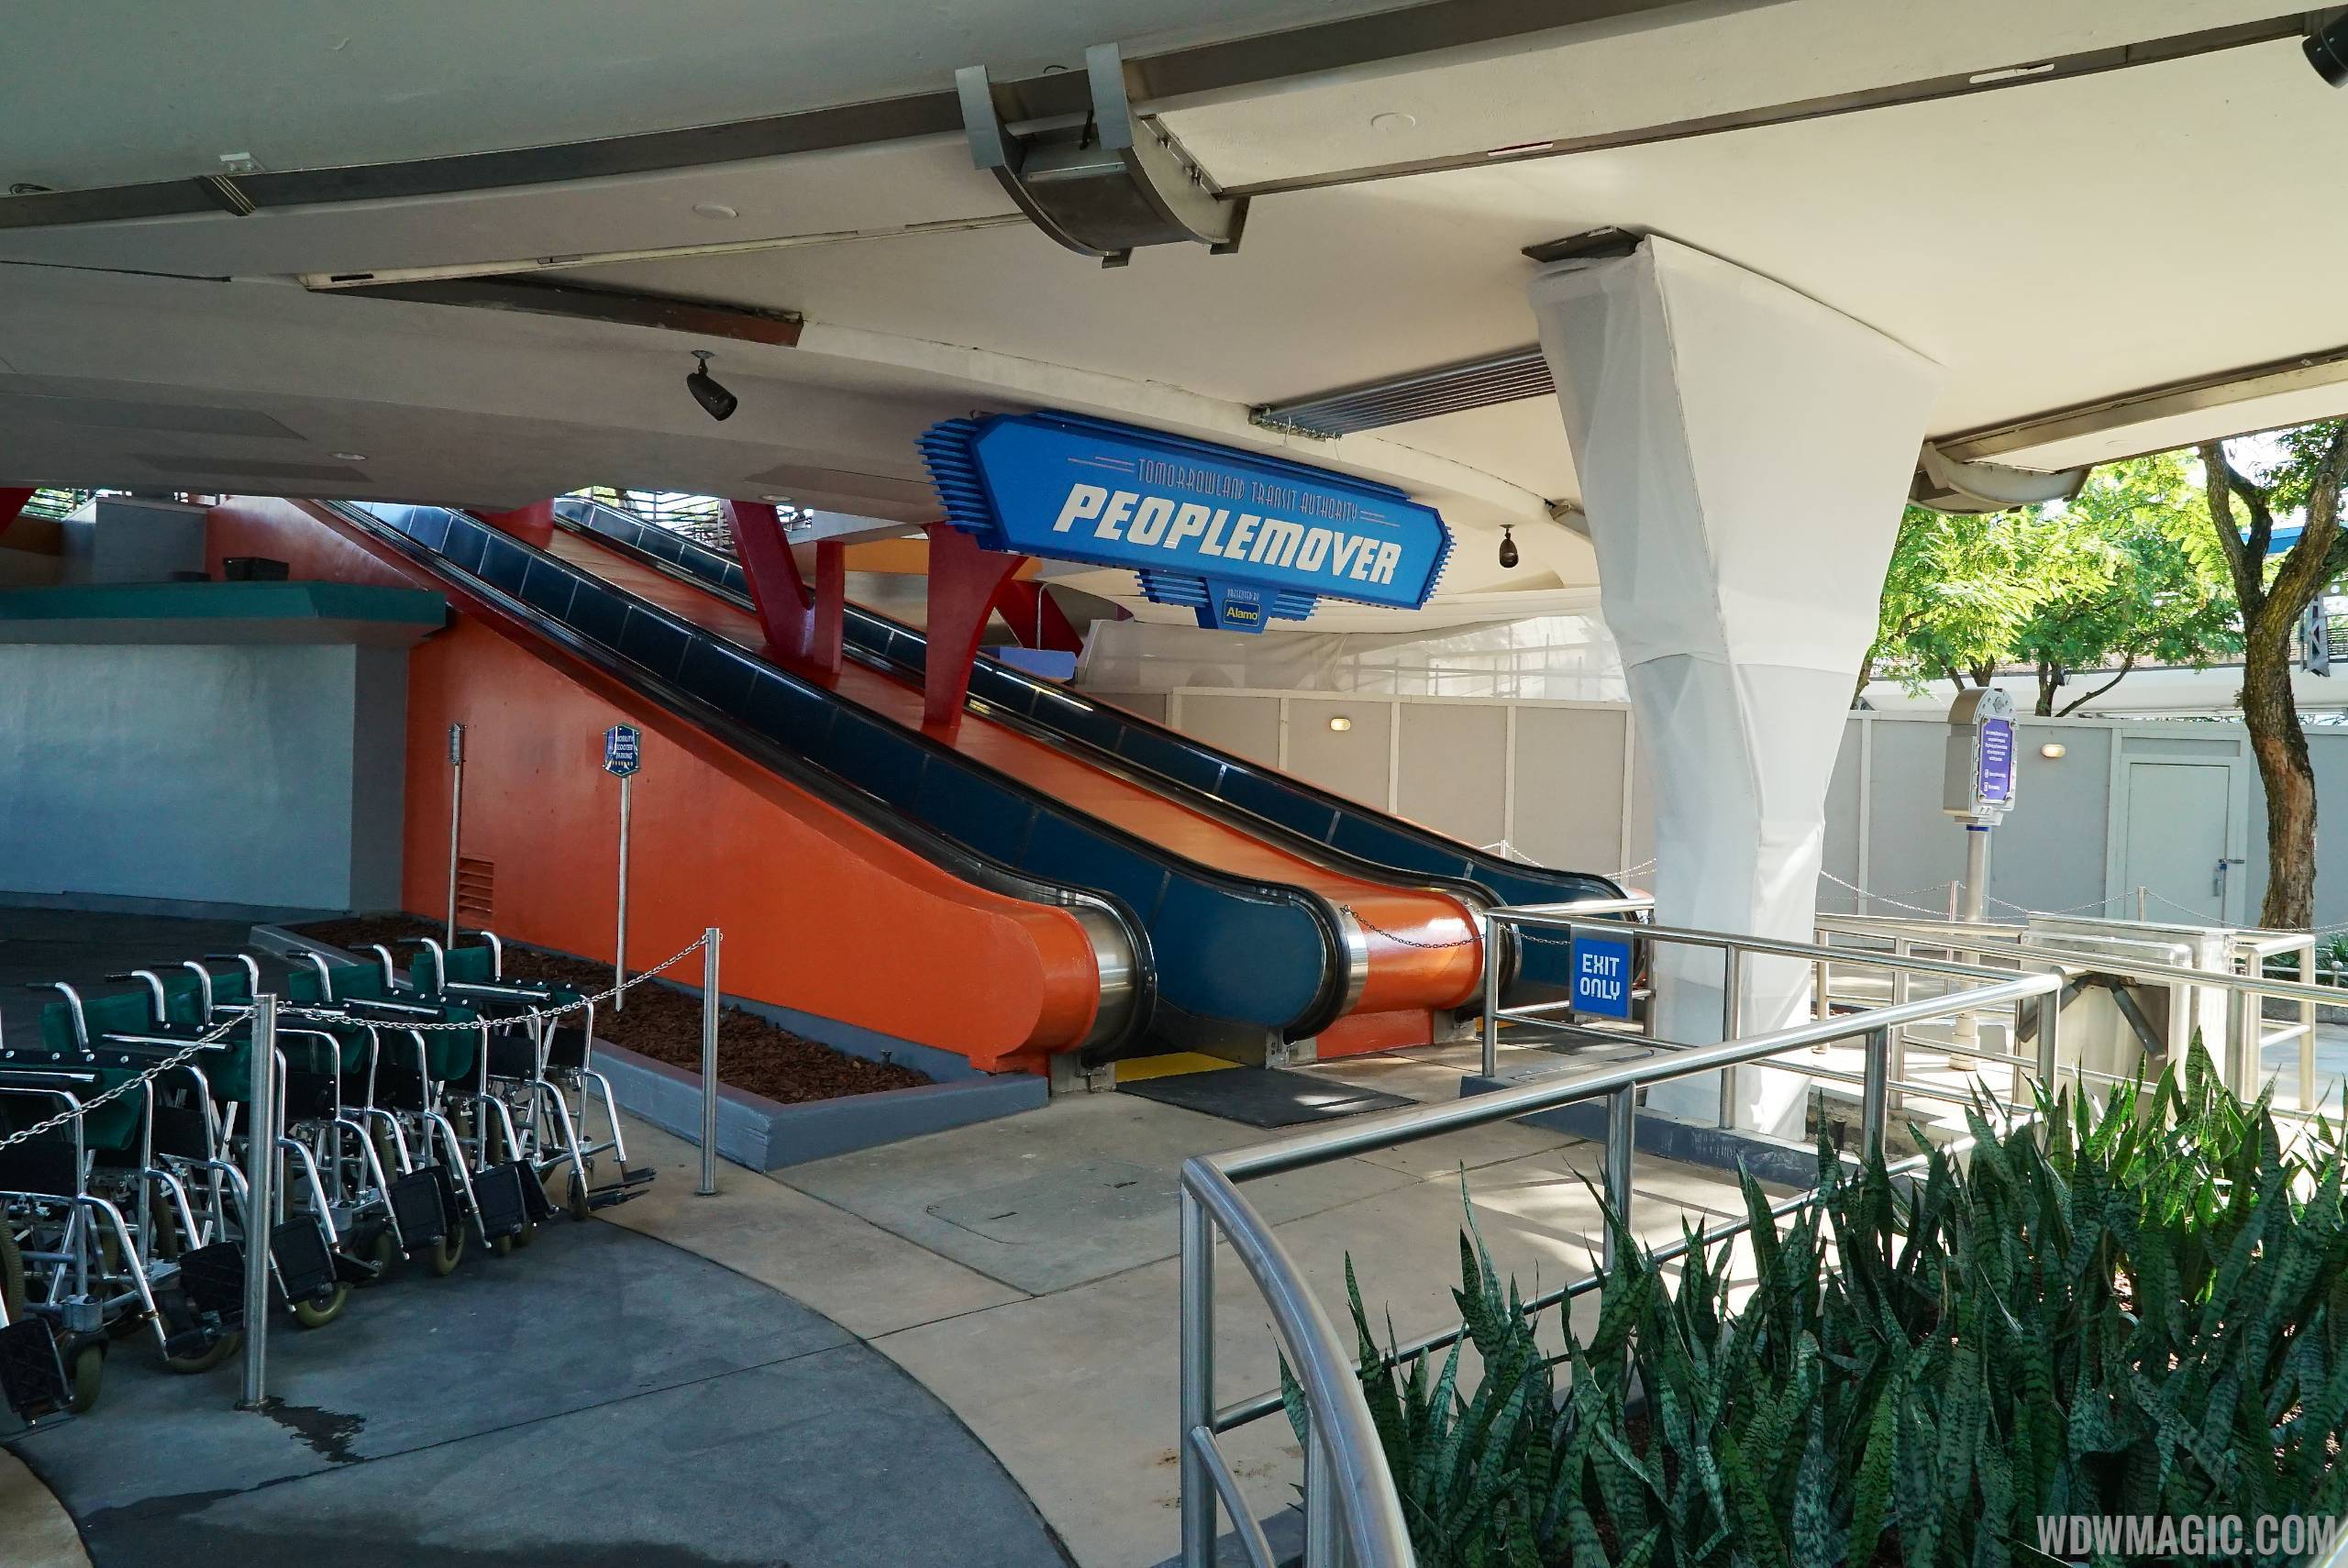 New paint scheme for the PeopleMover